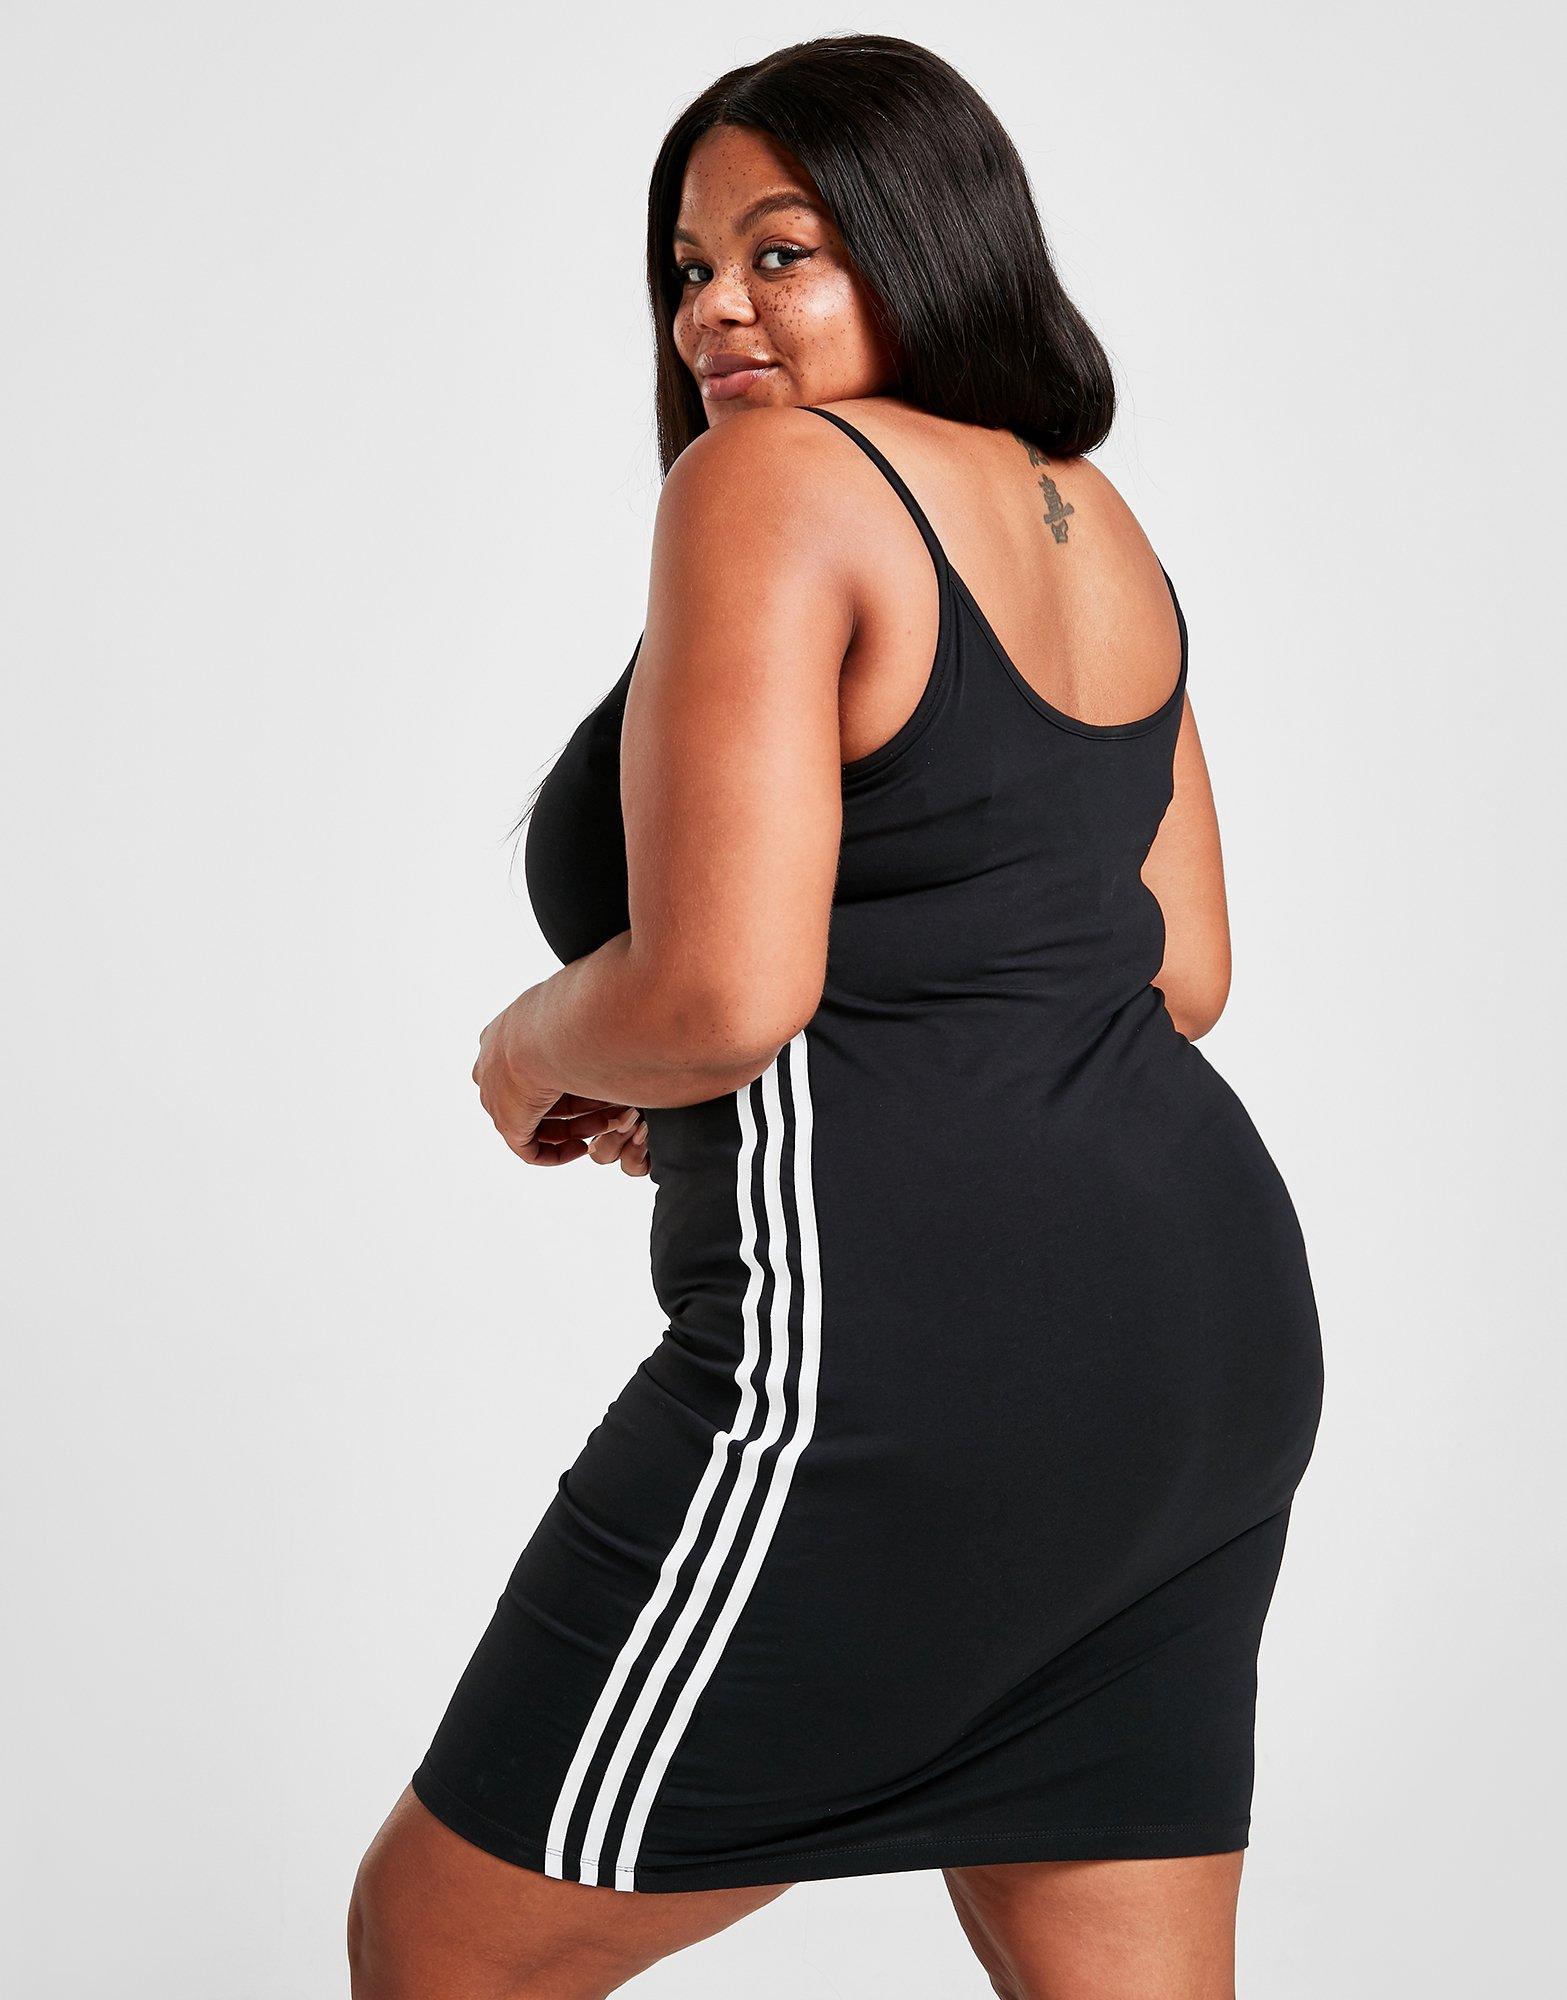 adidas plus size outfits